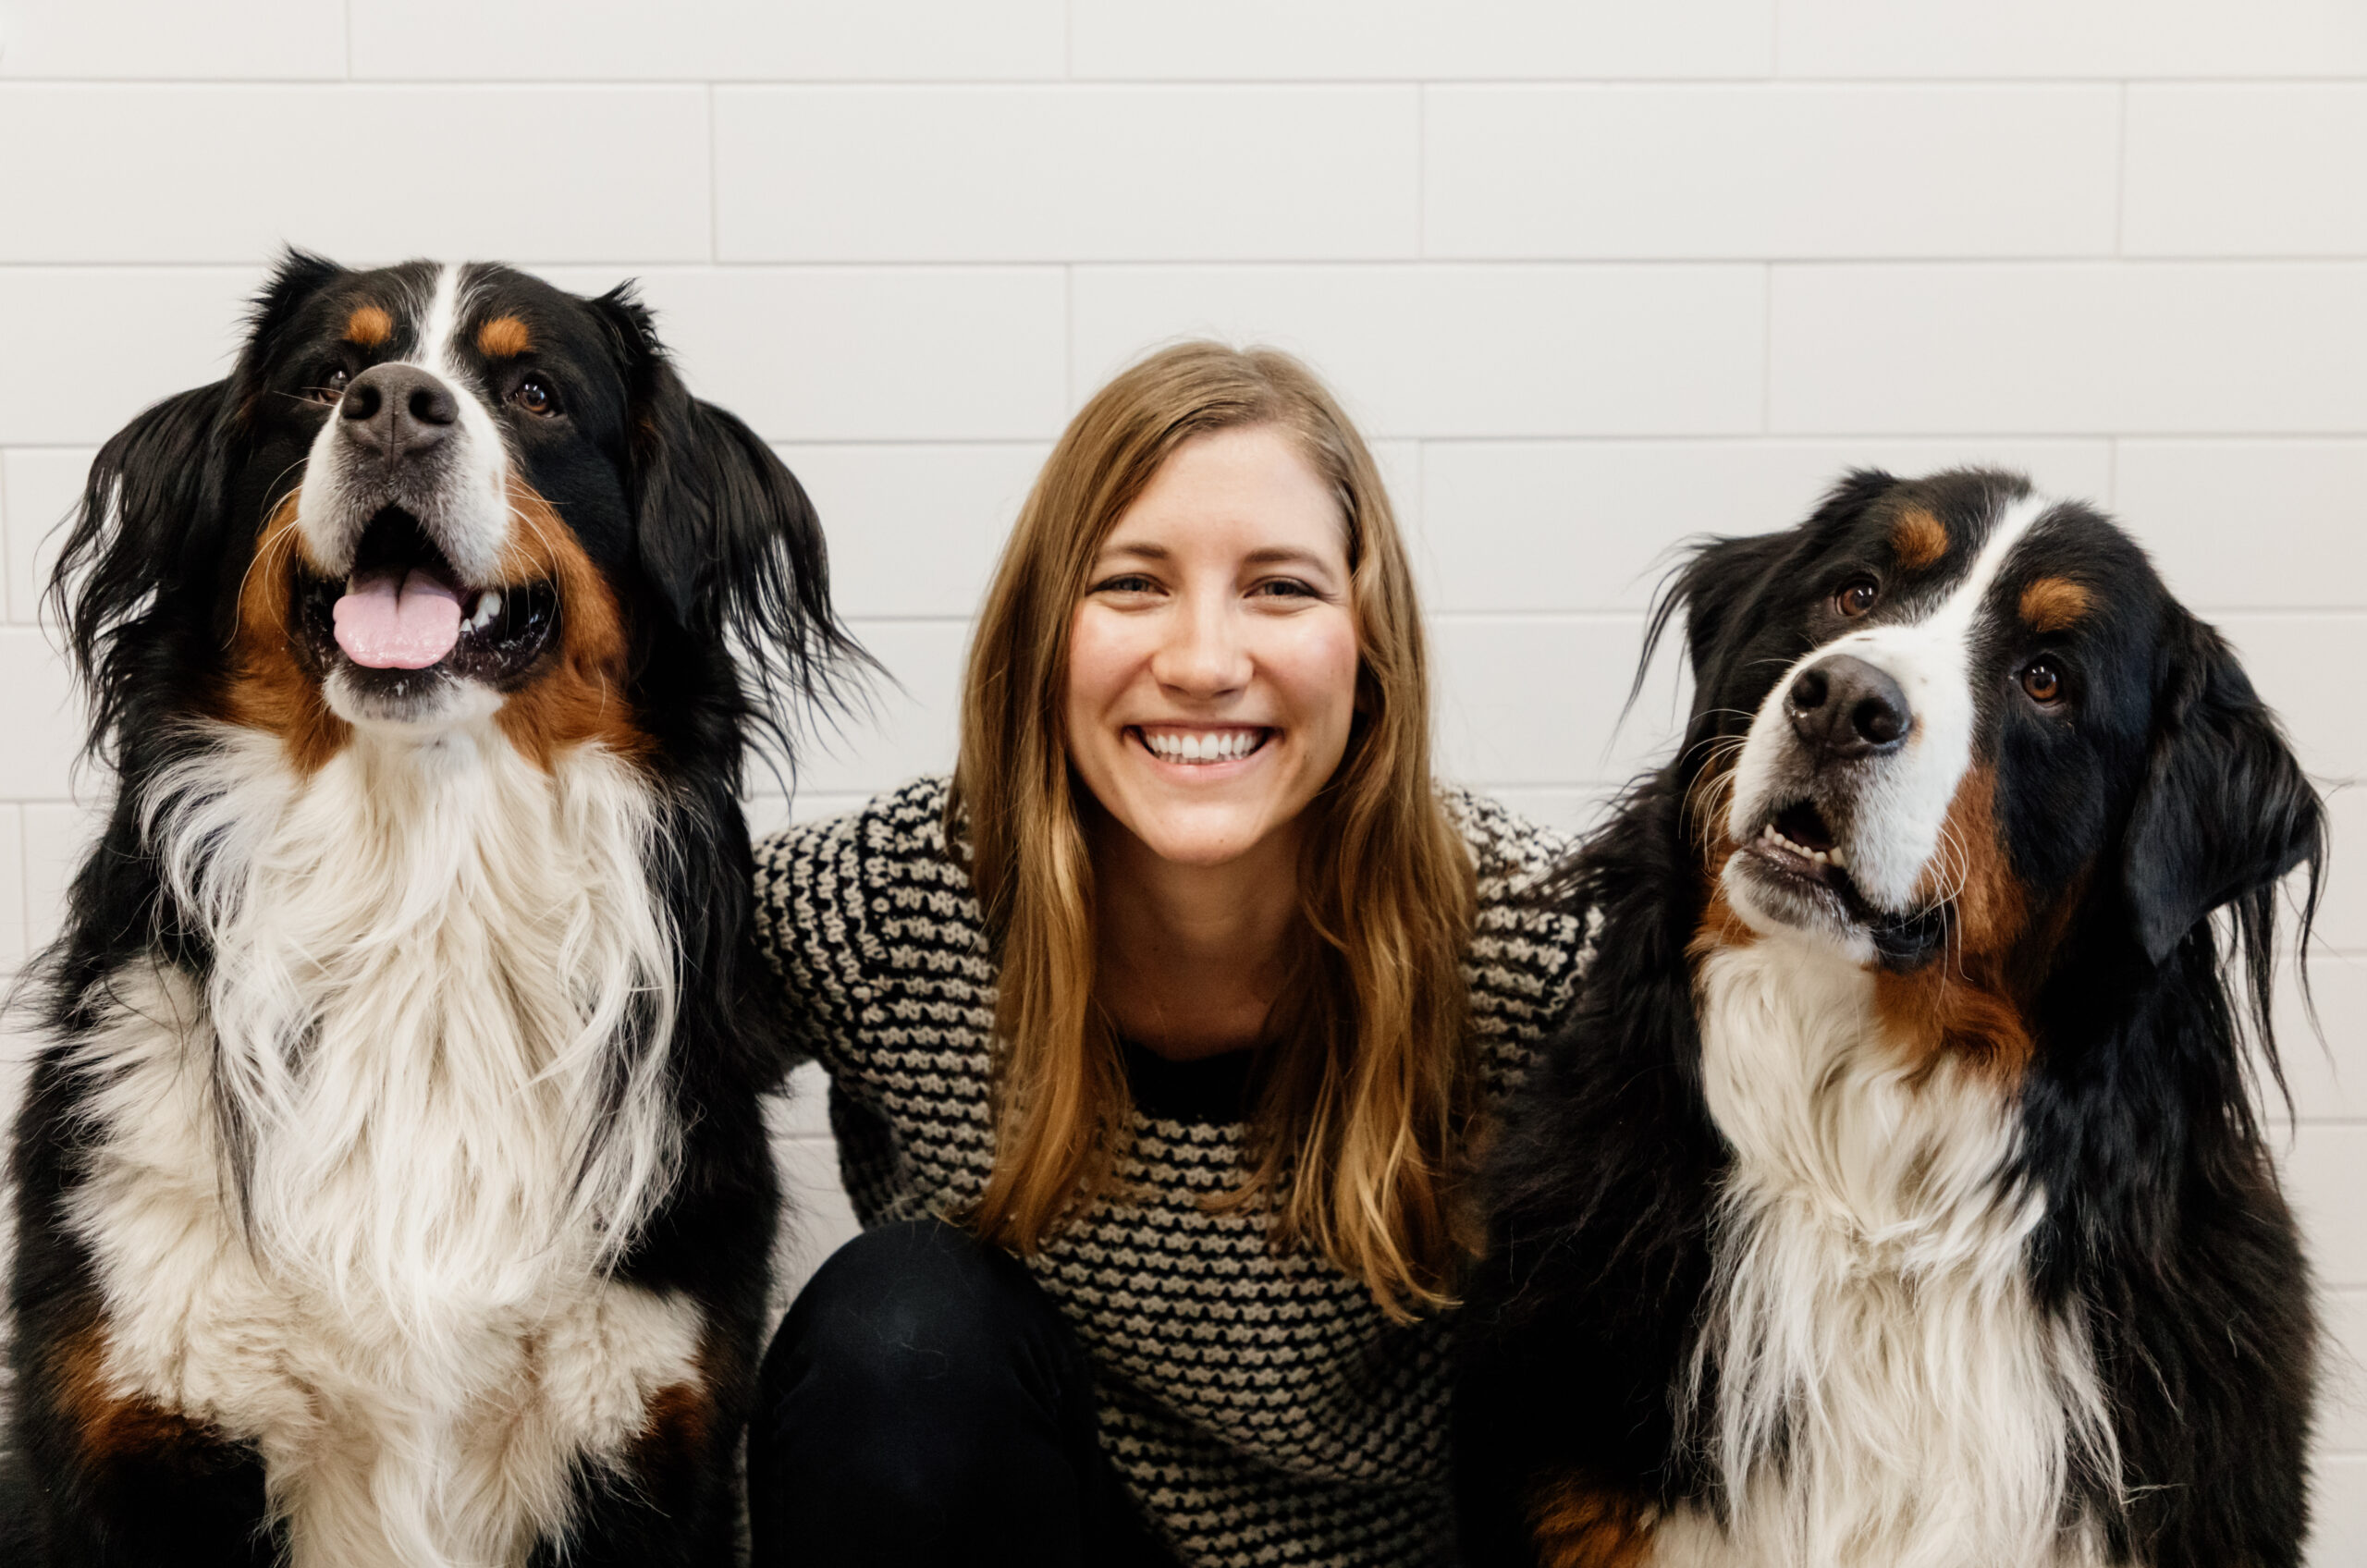 Abby with two dogs